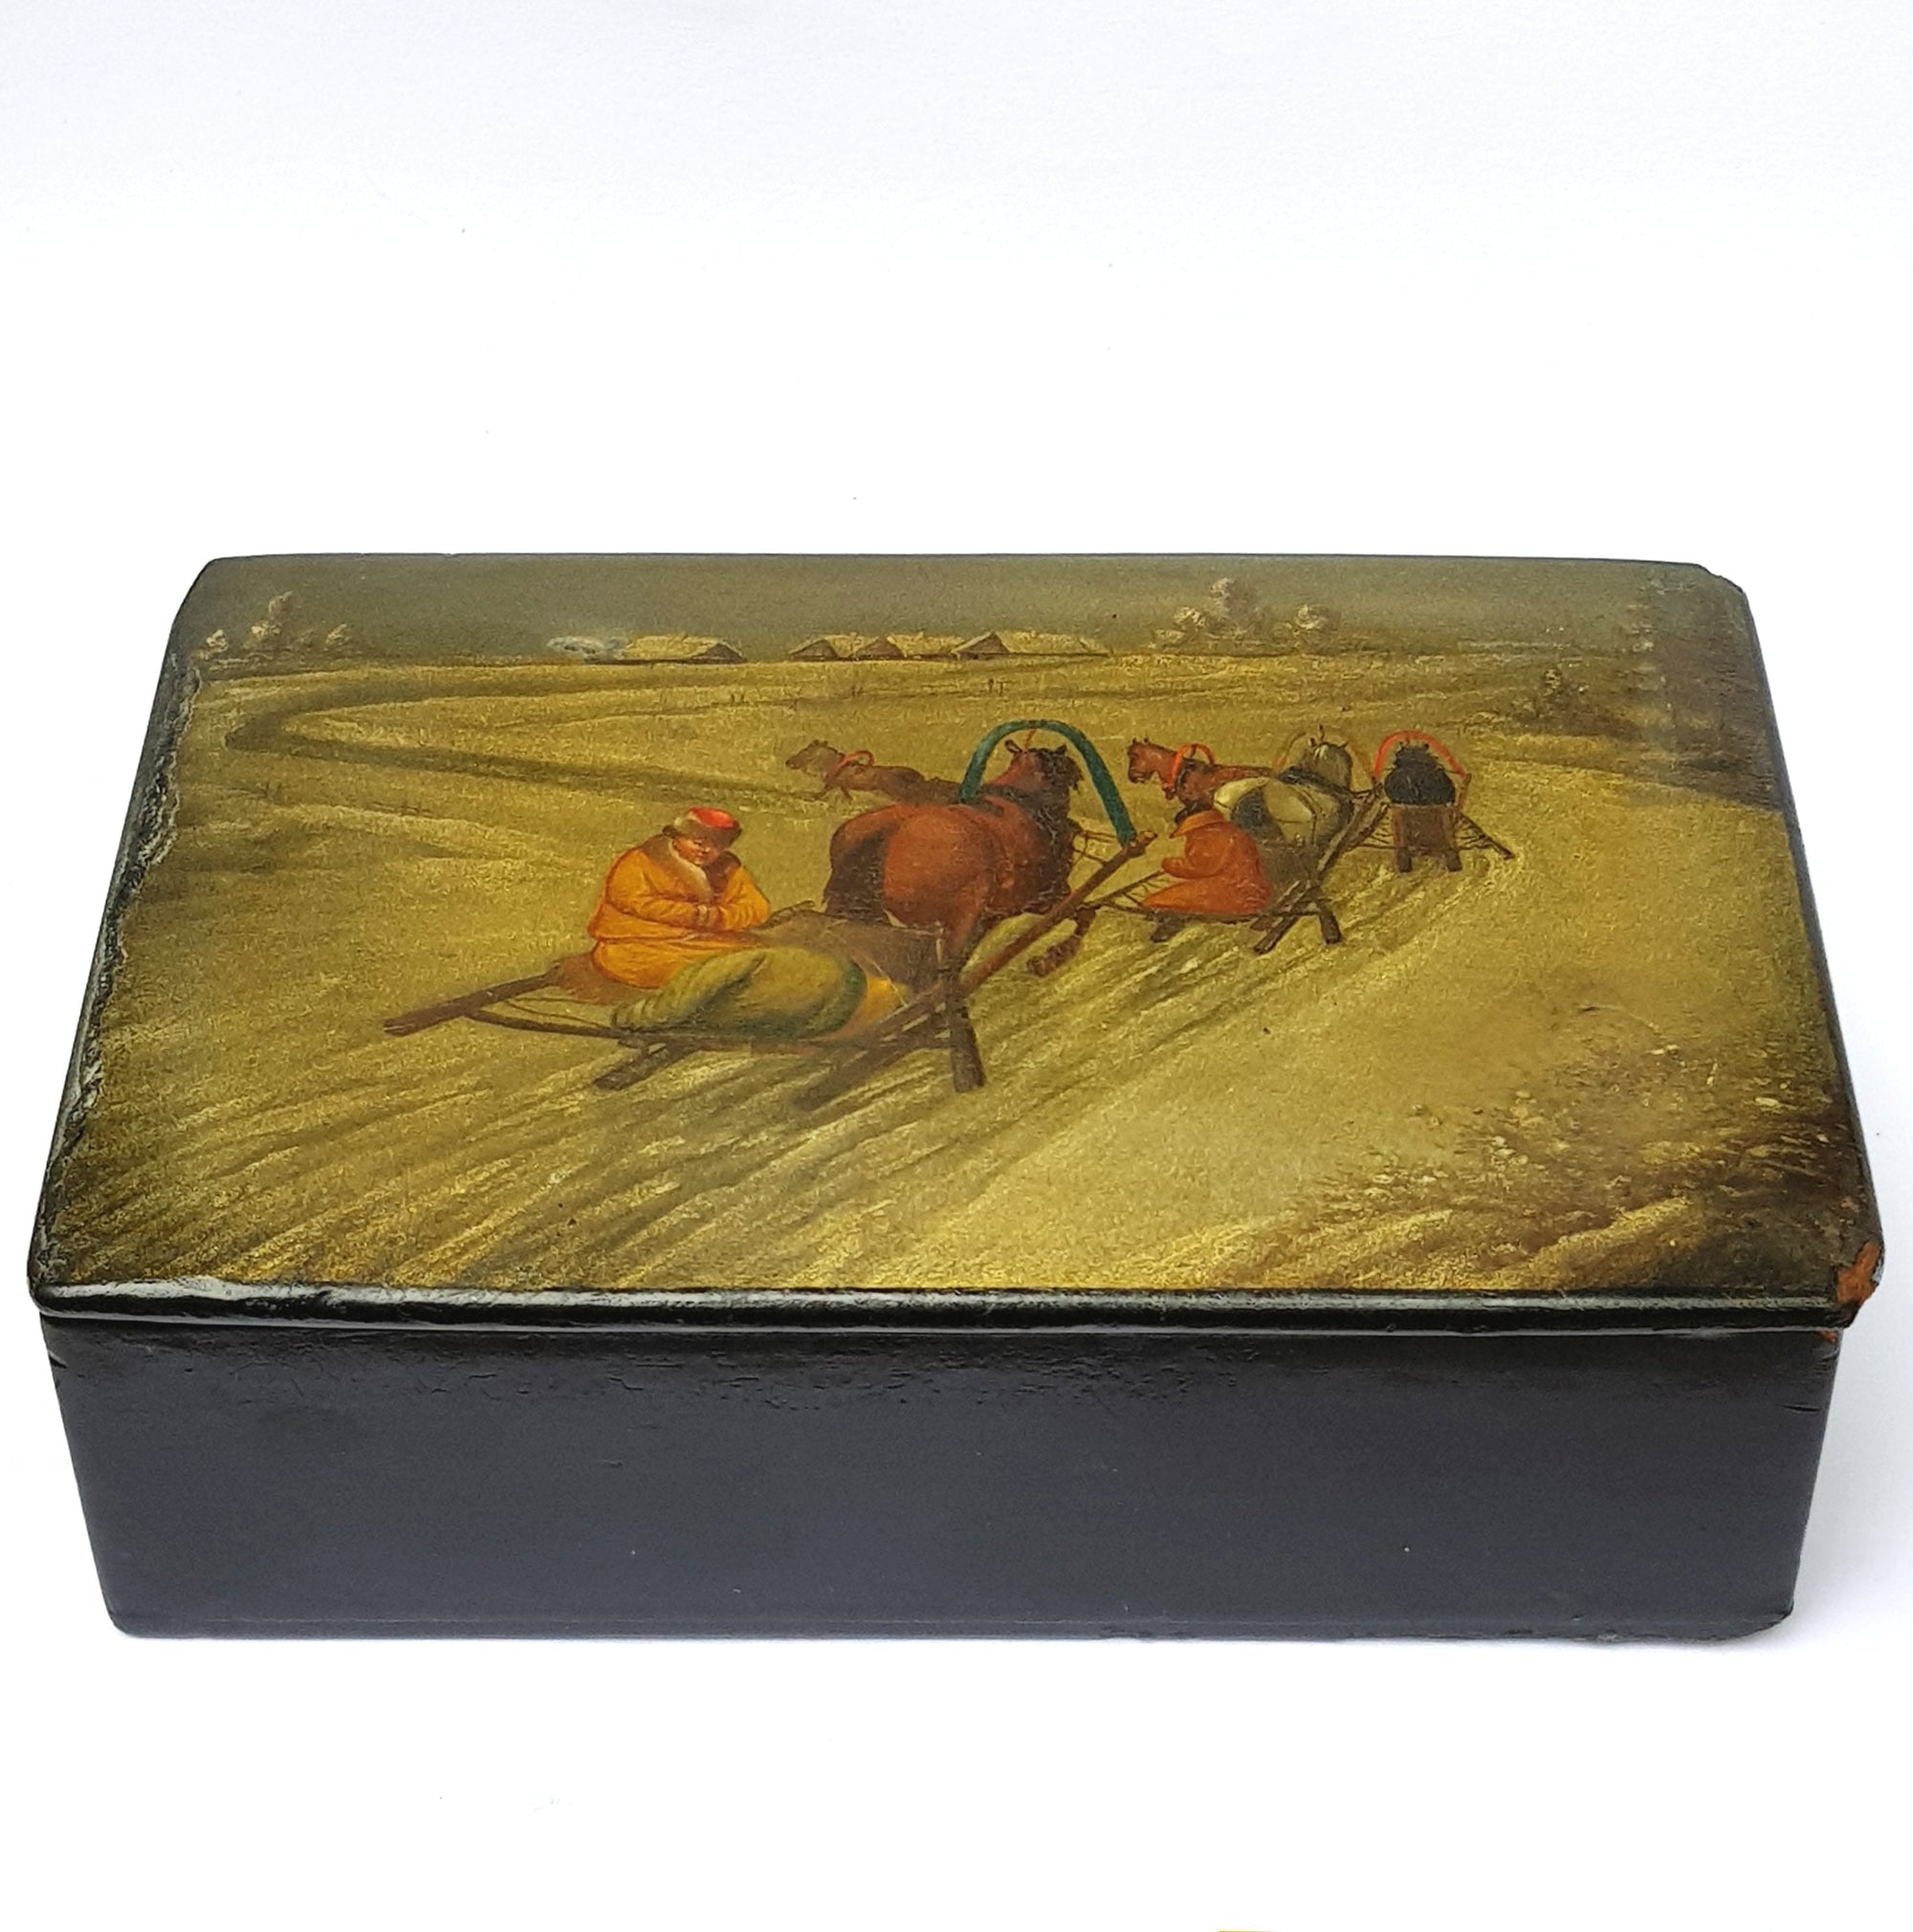 Gouache Hand Painted Table Snuff Box Sleigh Travellers In The Snow Scene Antique Russian Alexander II 19th Century Circa 1860's